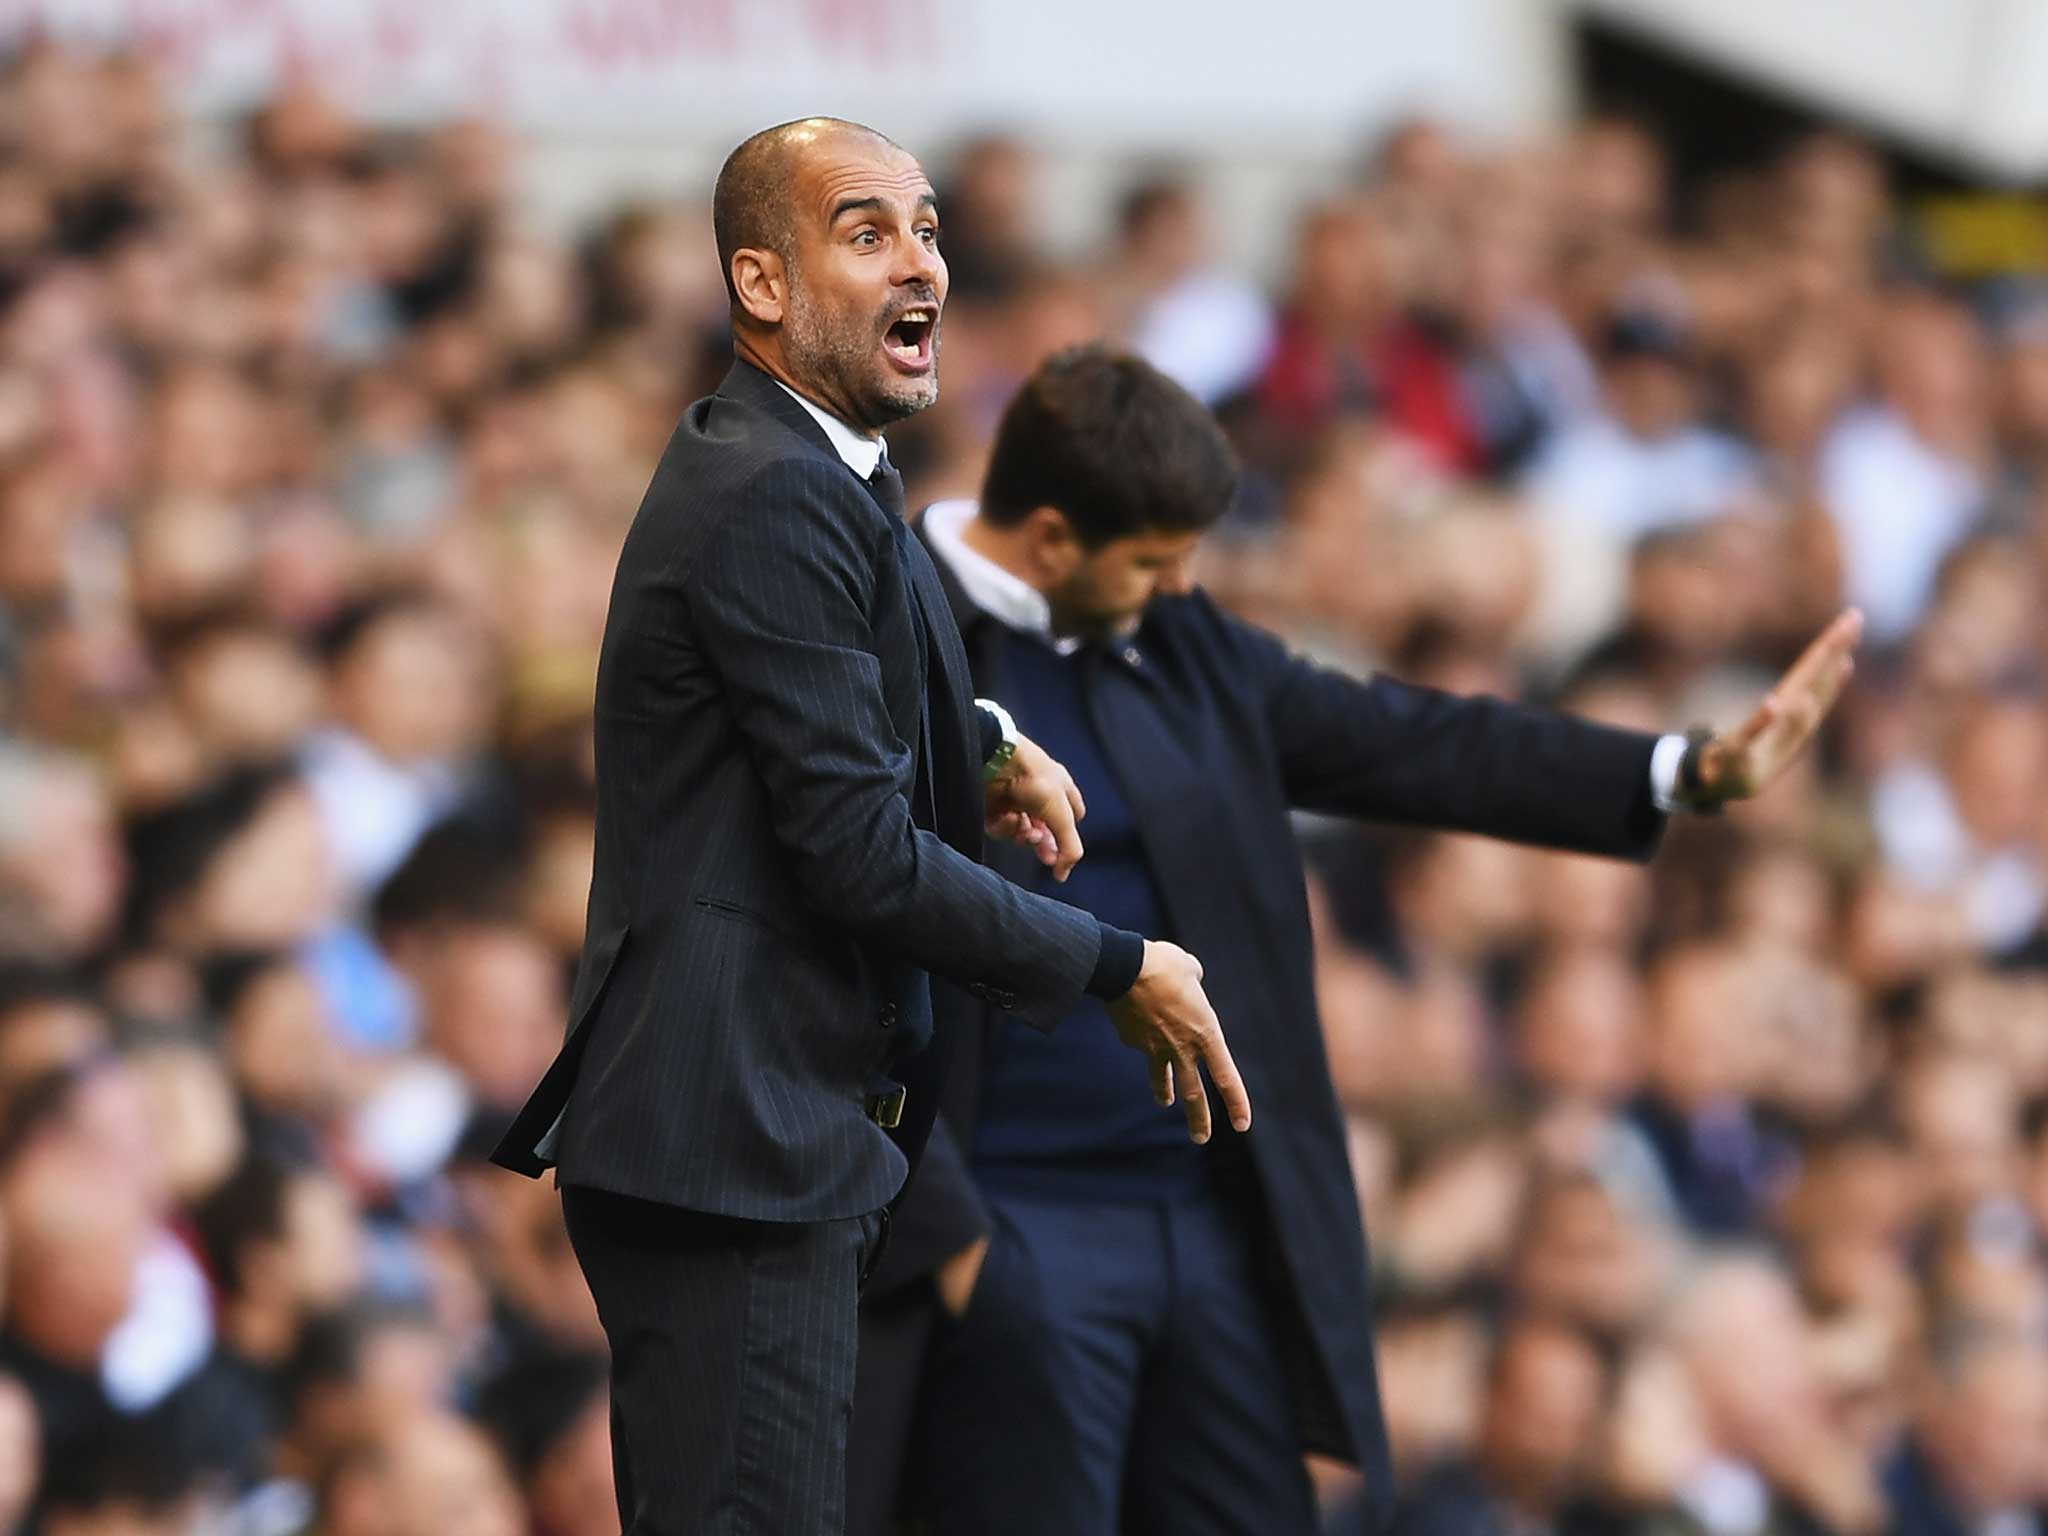 This was Pep Guardiola's first defeat as City manager